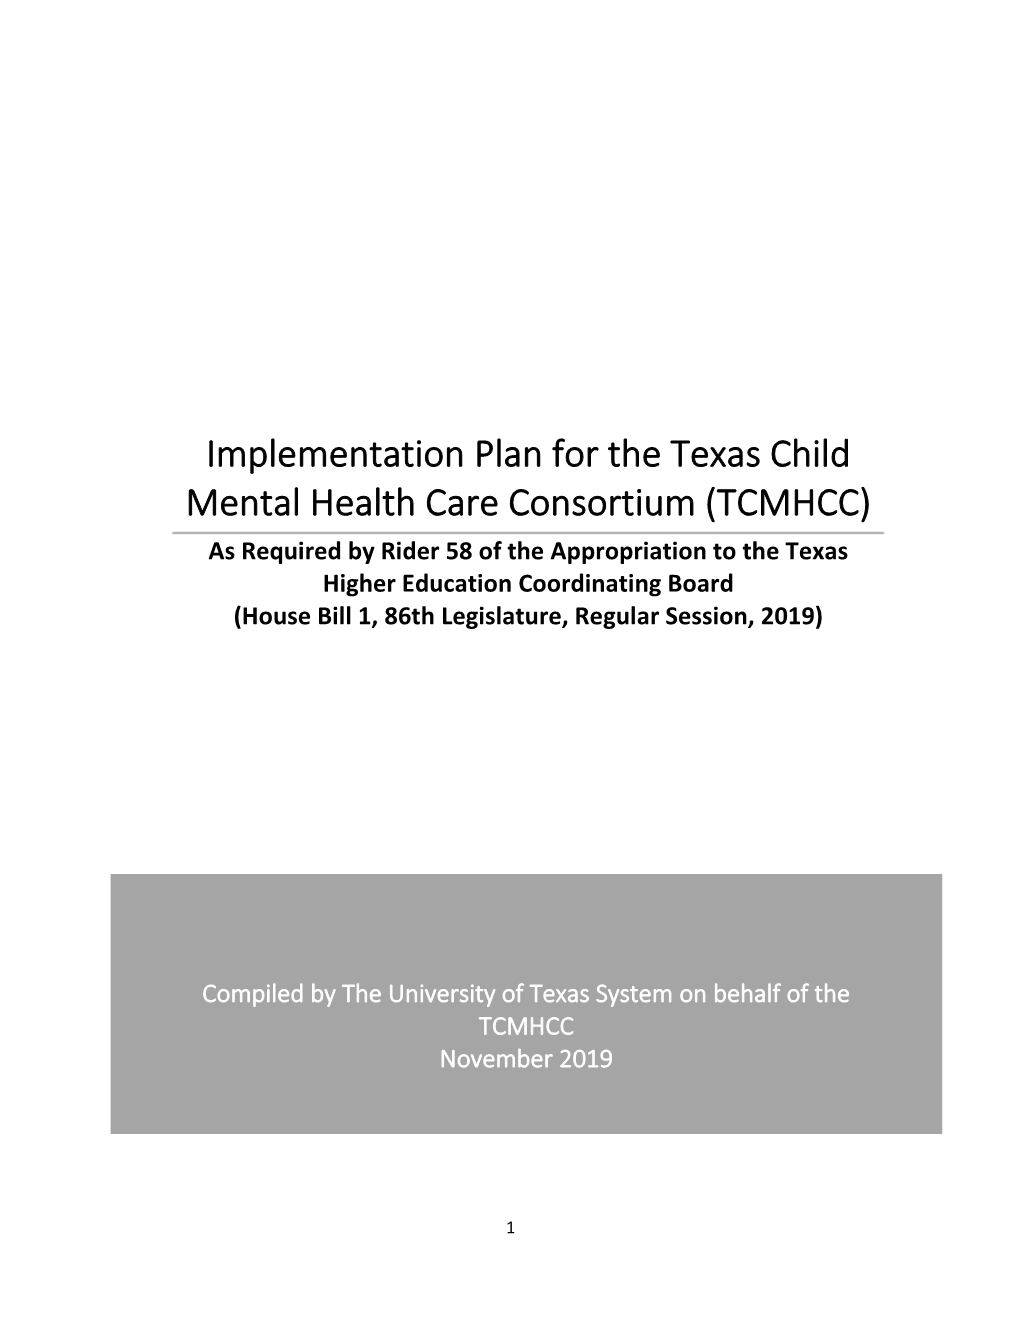 Implementation Plan for the Texas Child Mental Health Care Consortium